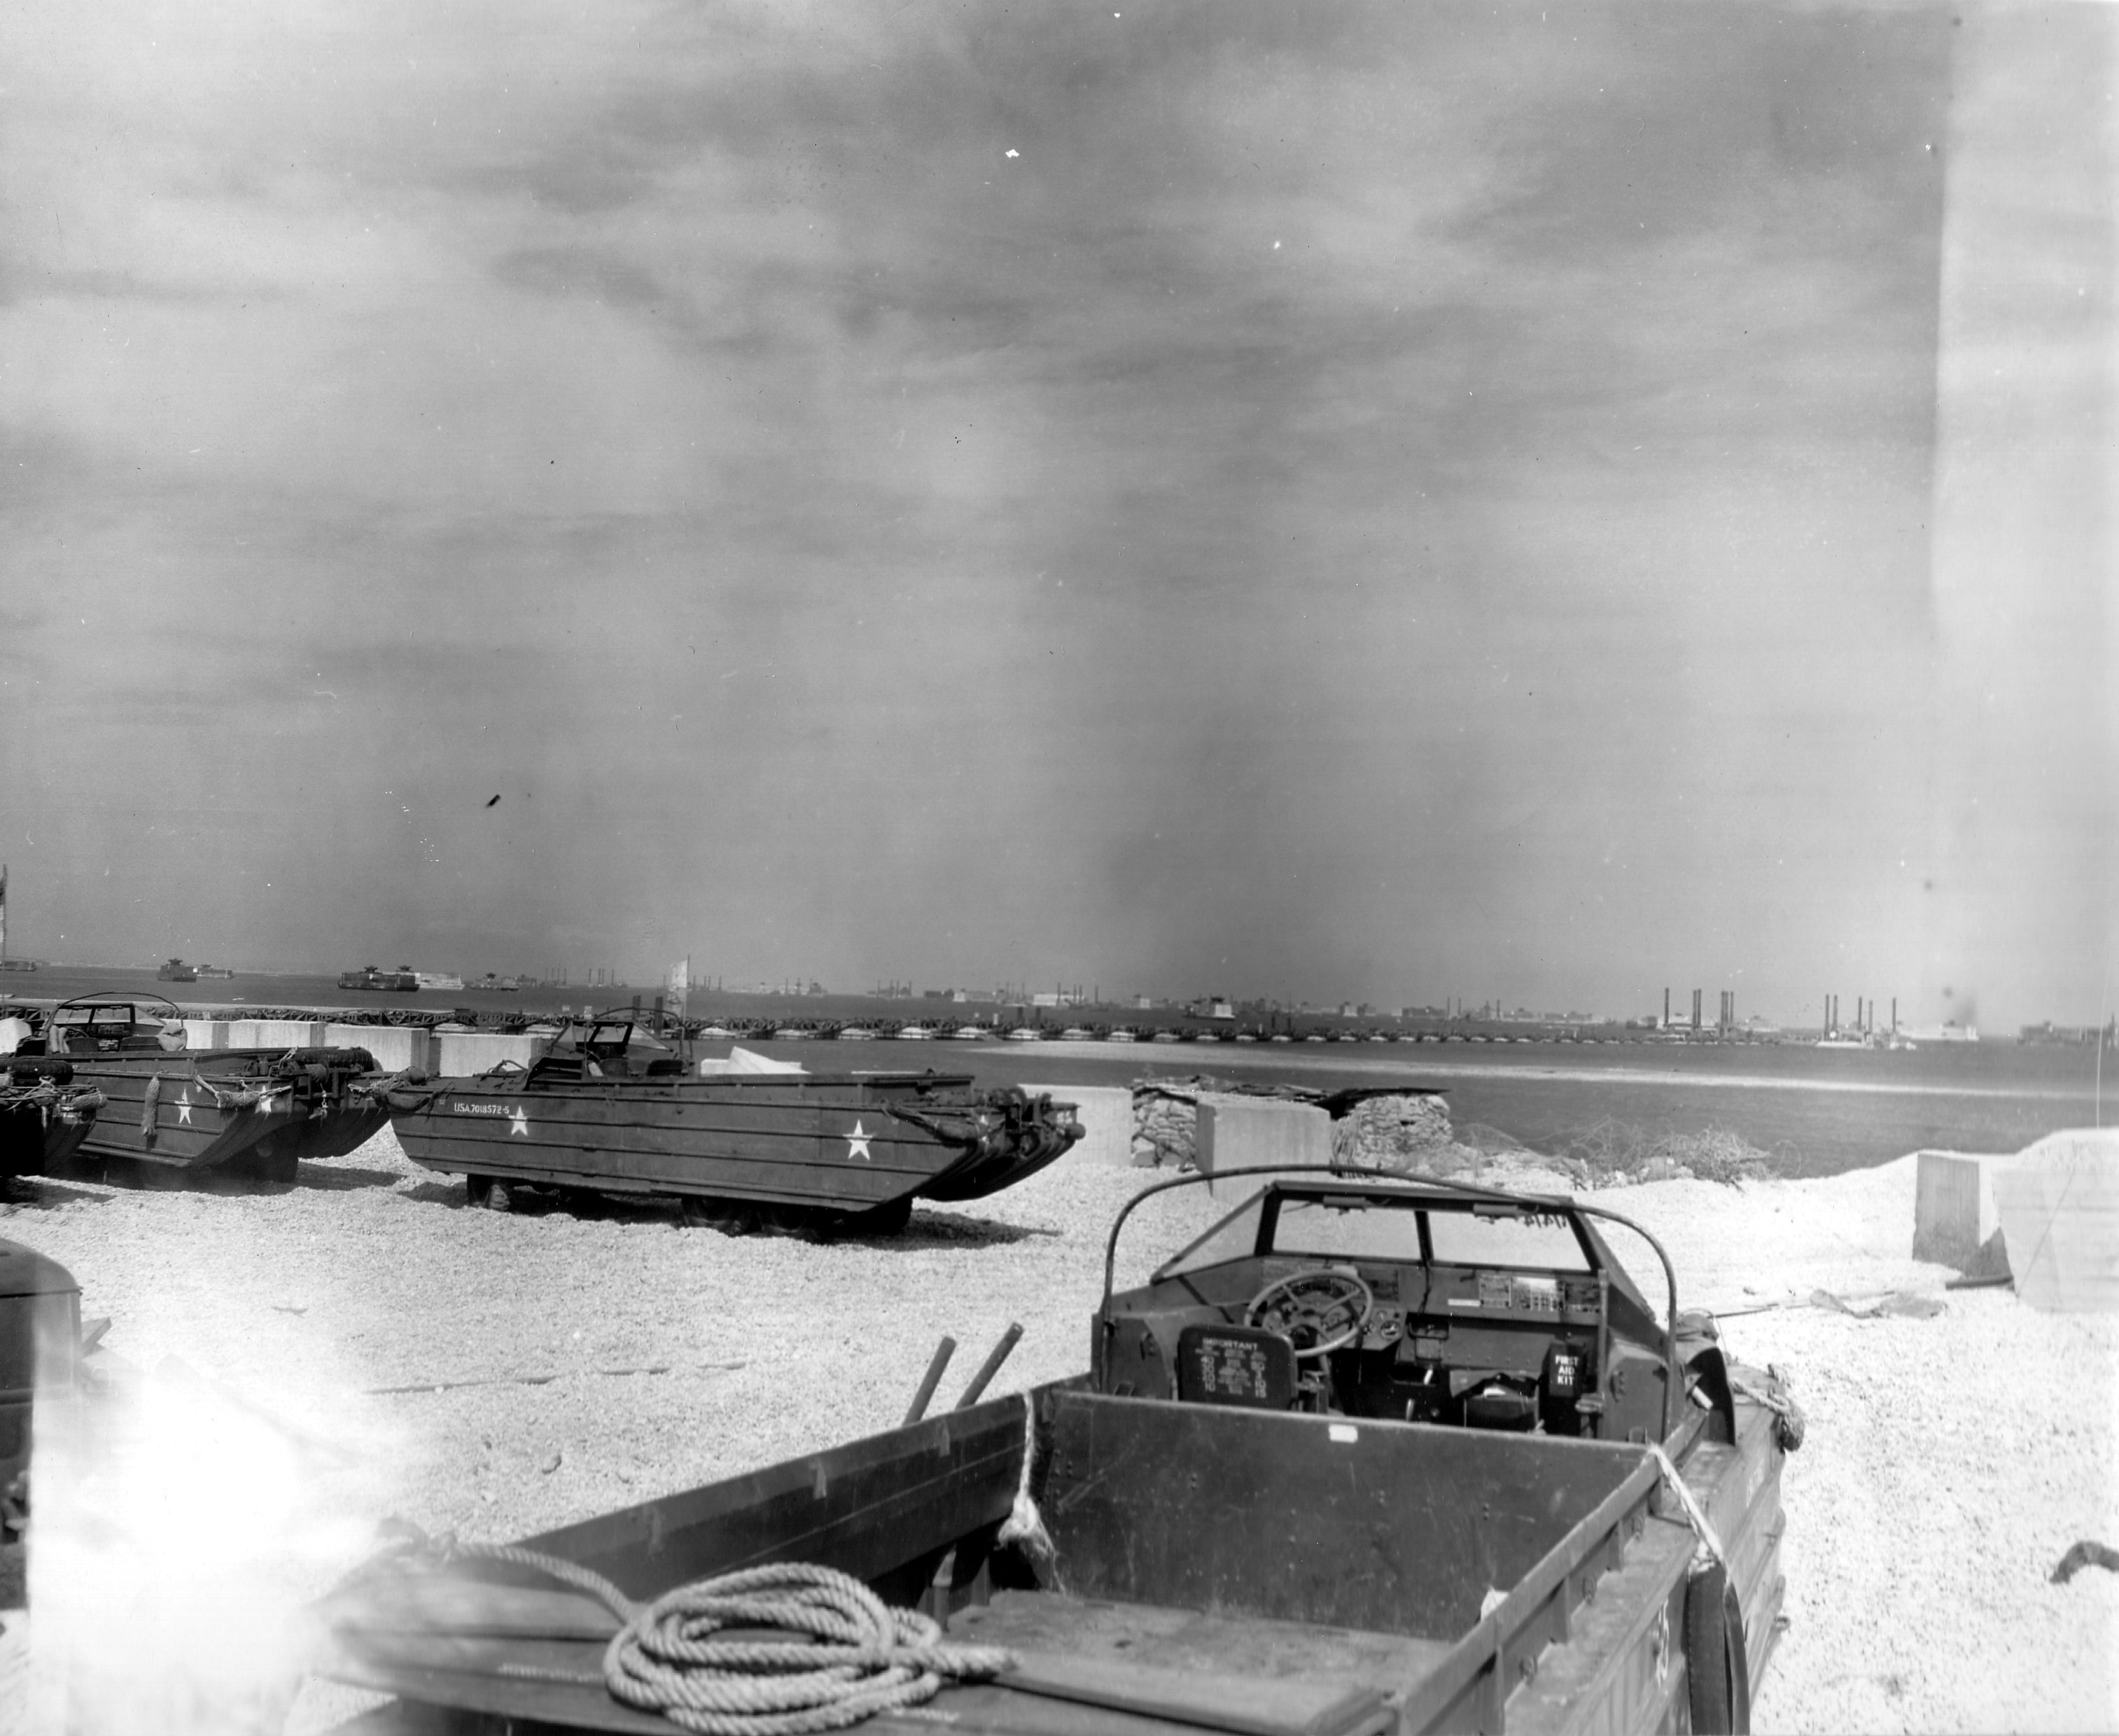 DUKWs on the beach at Selsey, West Sussex, England prior to the Normandy invasion, May 1944. Note components of the artificial Mulberry Harbors in the background awaiting deployment.